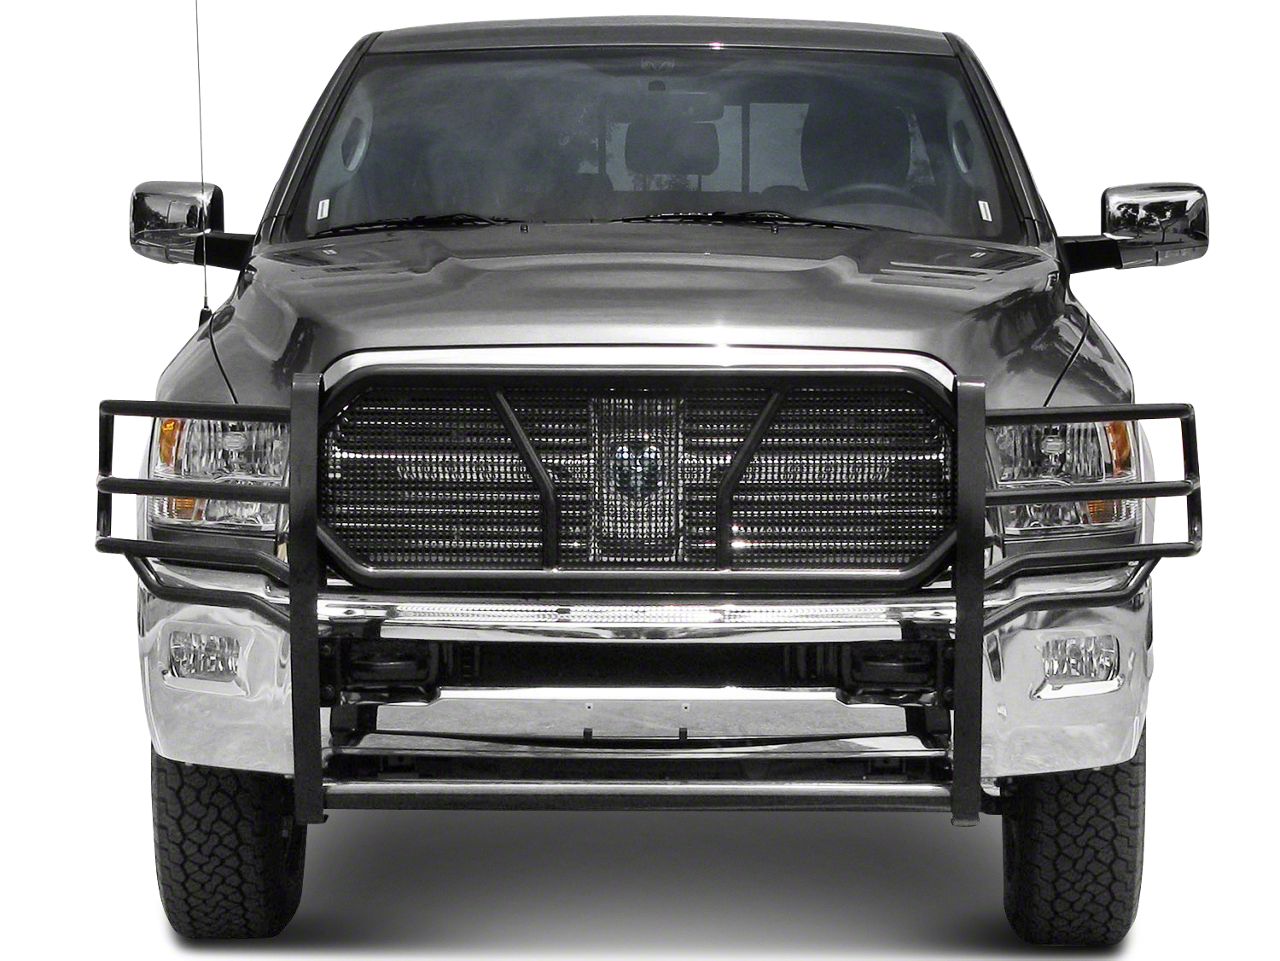 Ram 1500 Brush Guards & Grille Guards